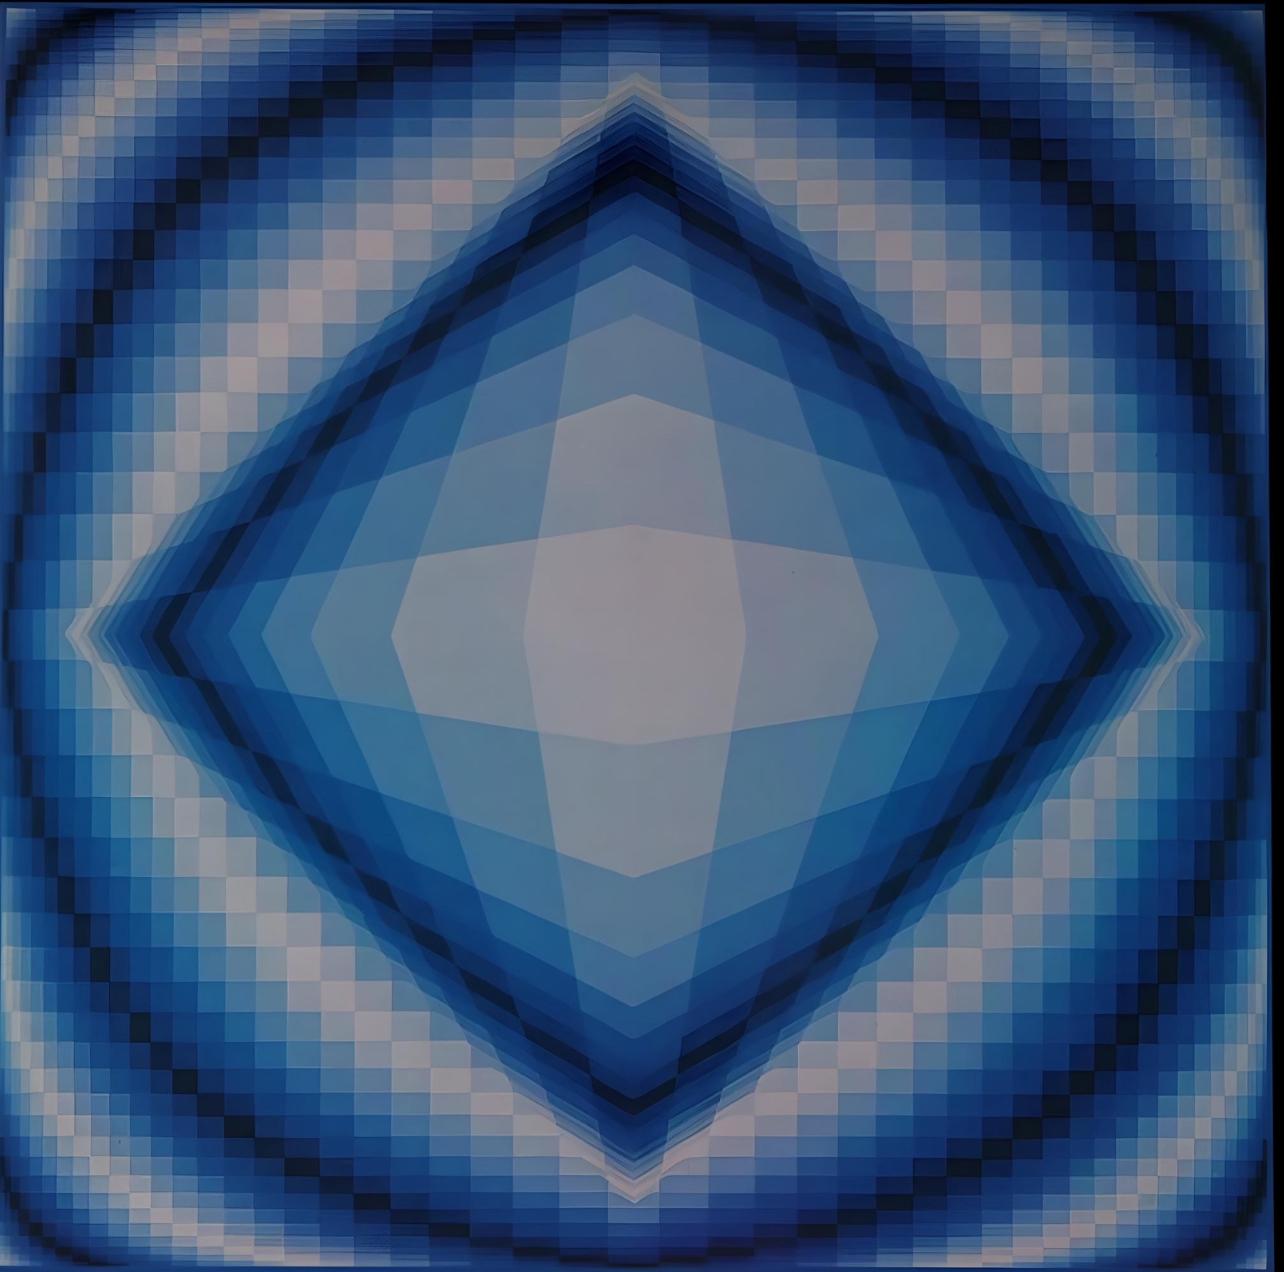 Vasarely, Composition, Structures universelles de l'Octogone (after) - Print by Victor Vasarely